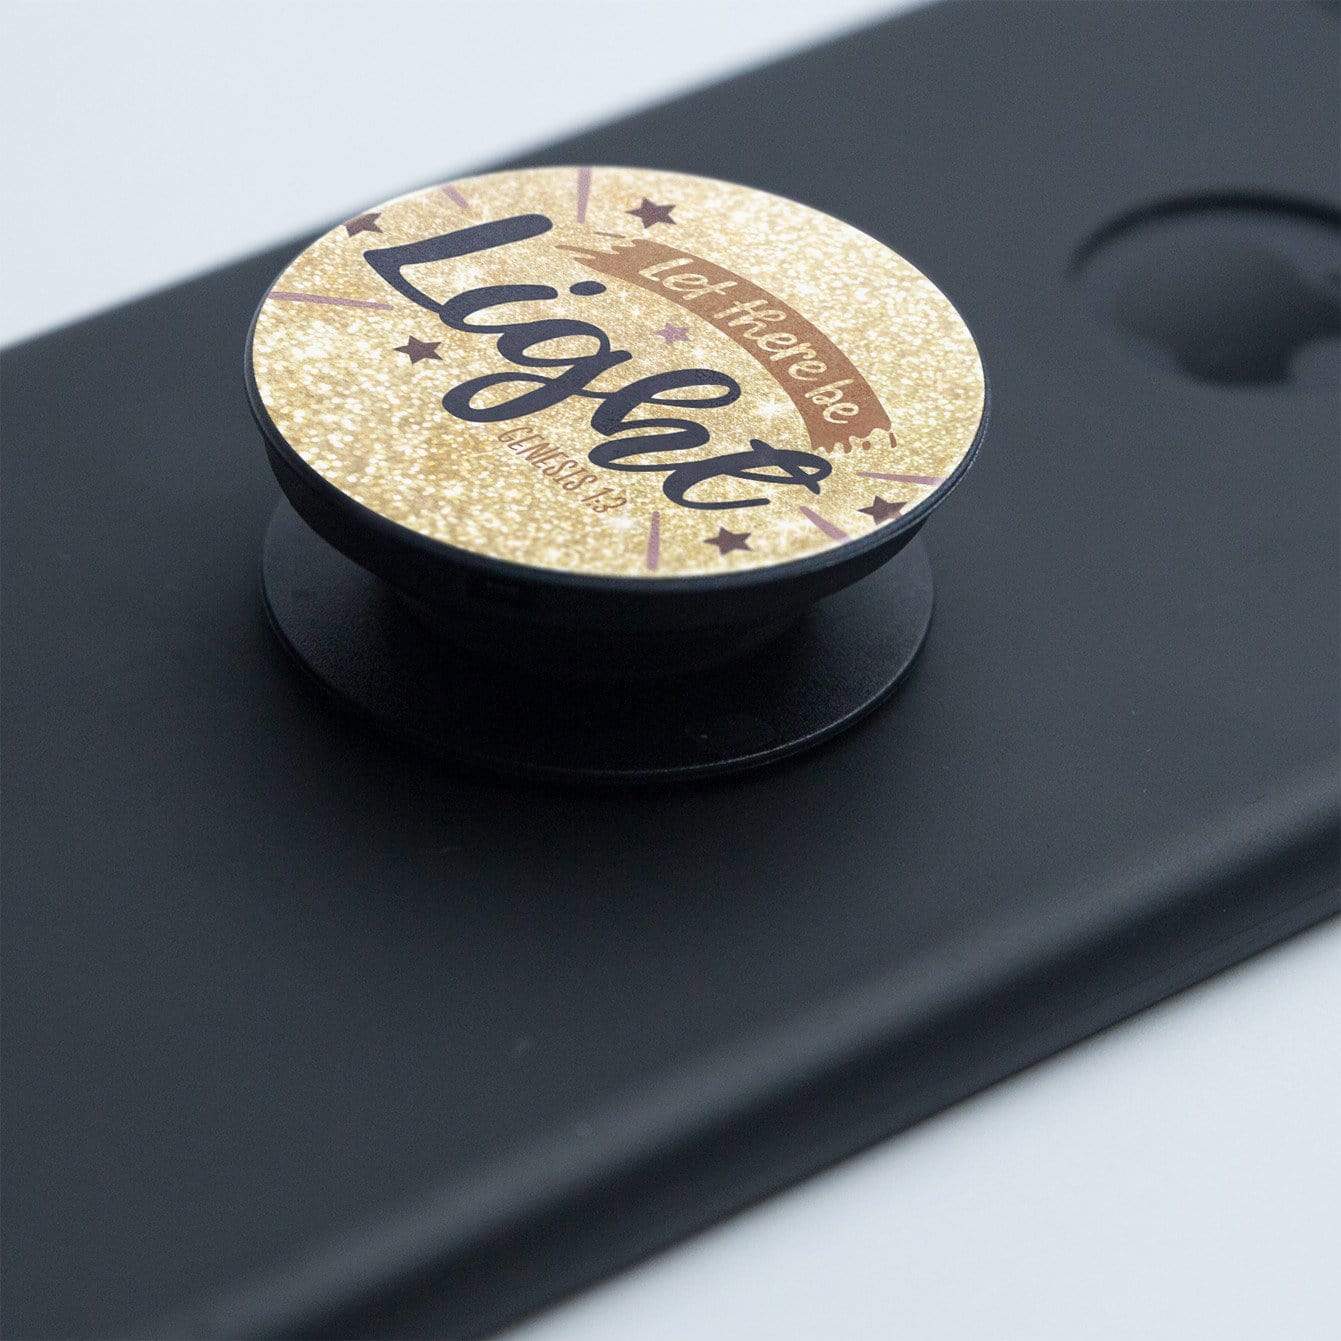 Living Words Let there be - Pop Socket